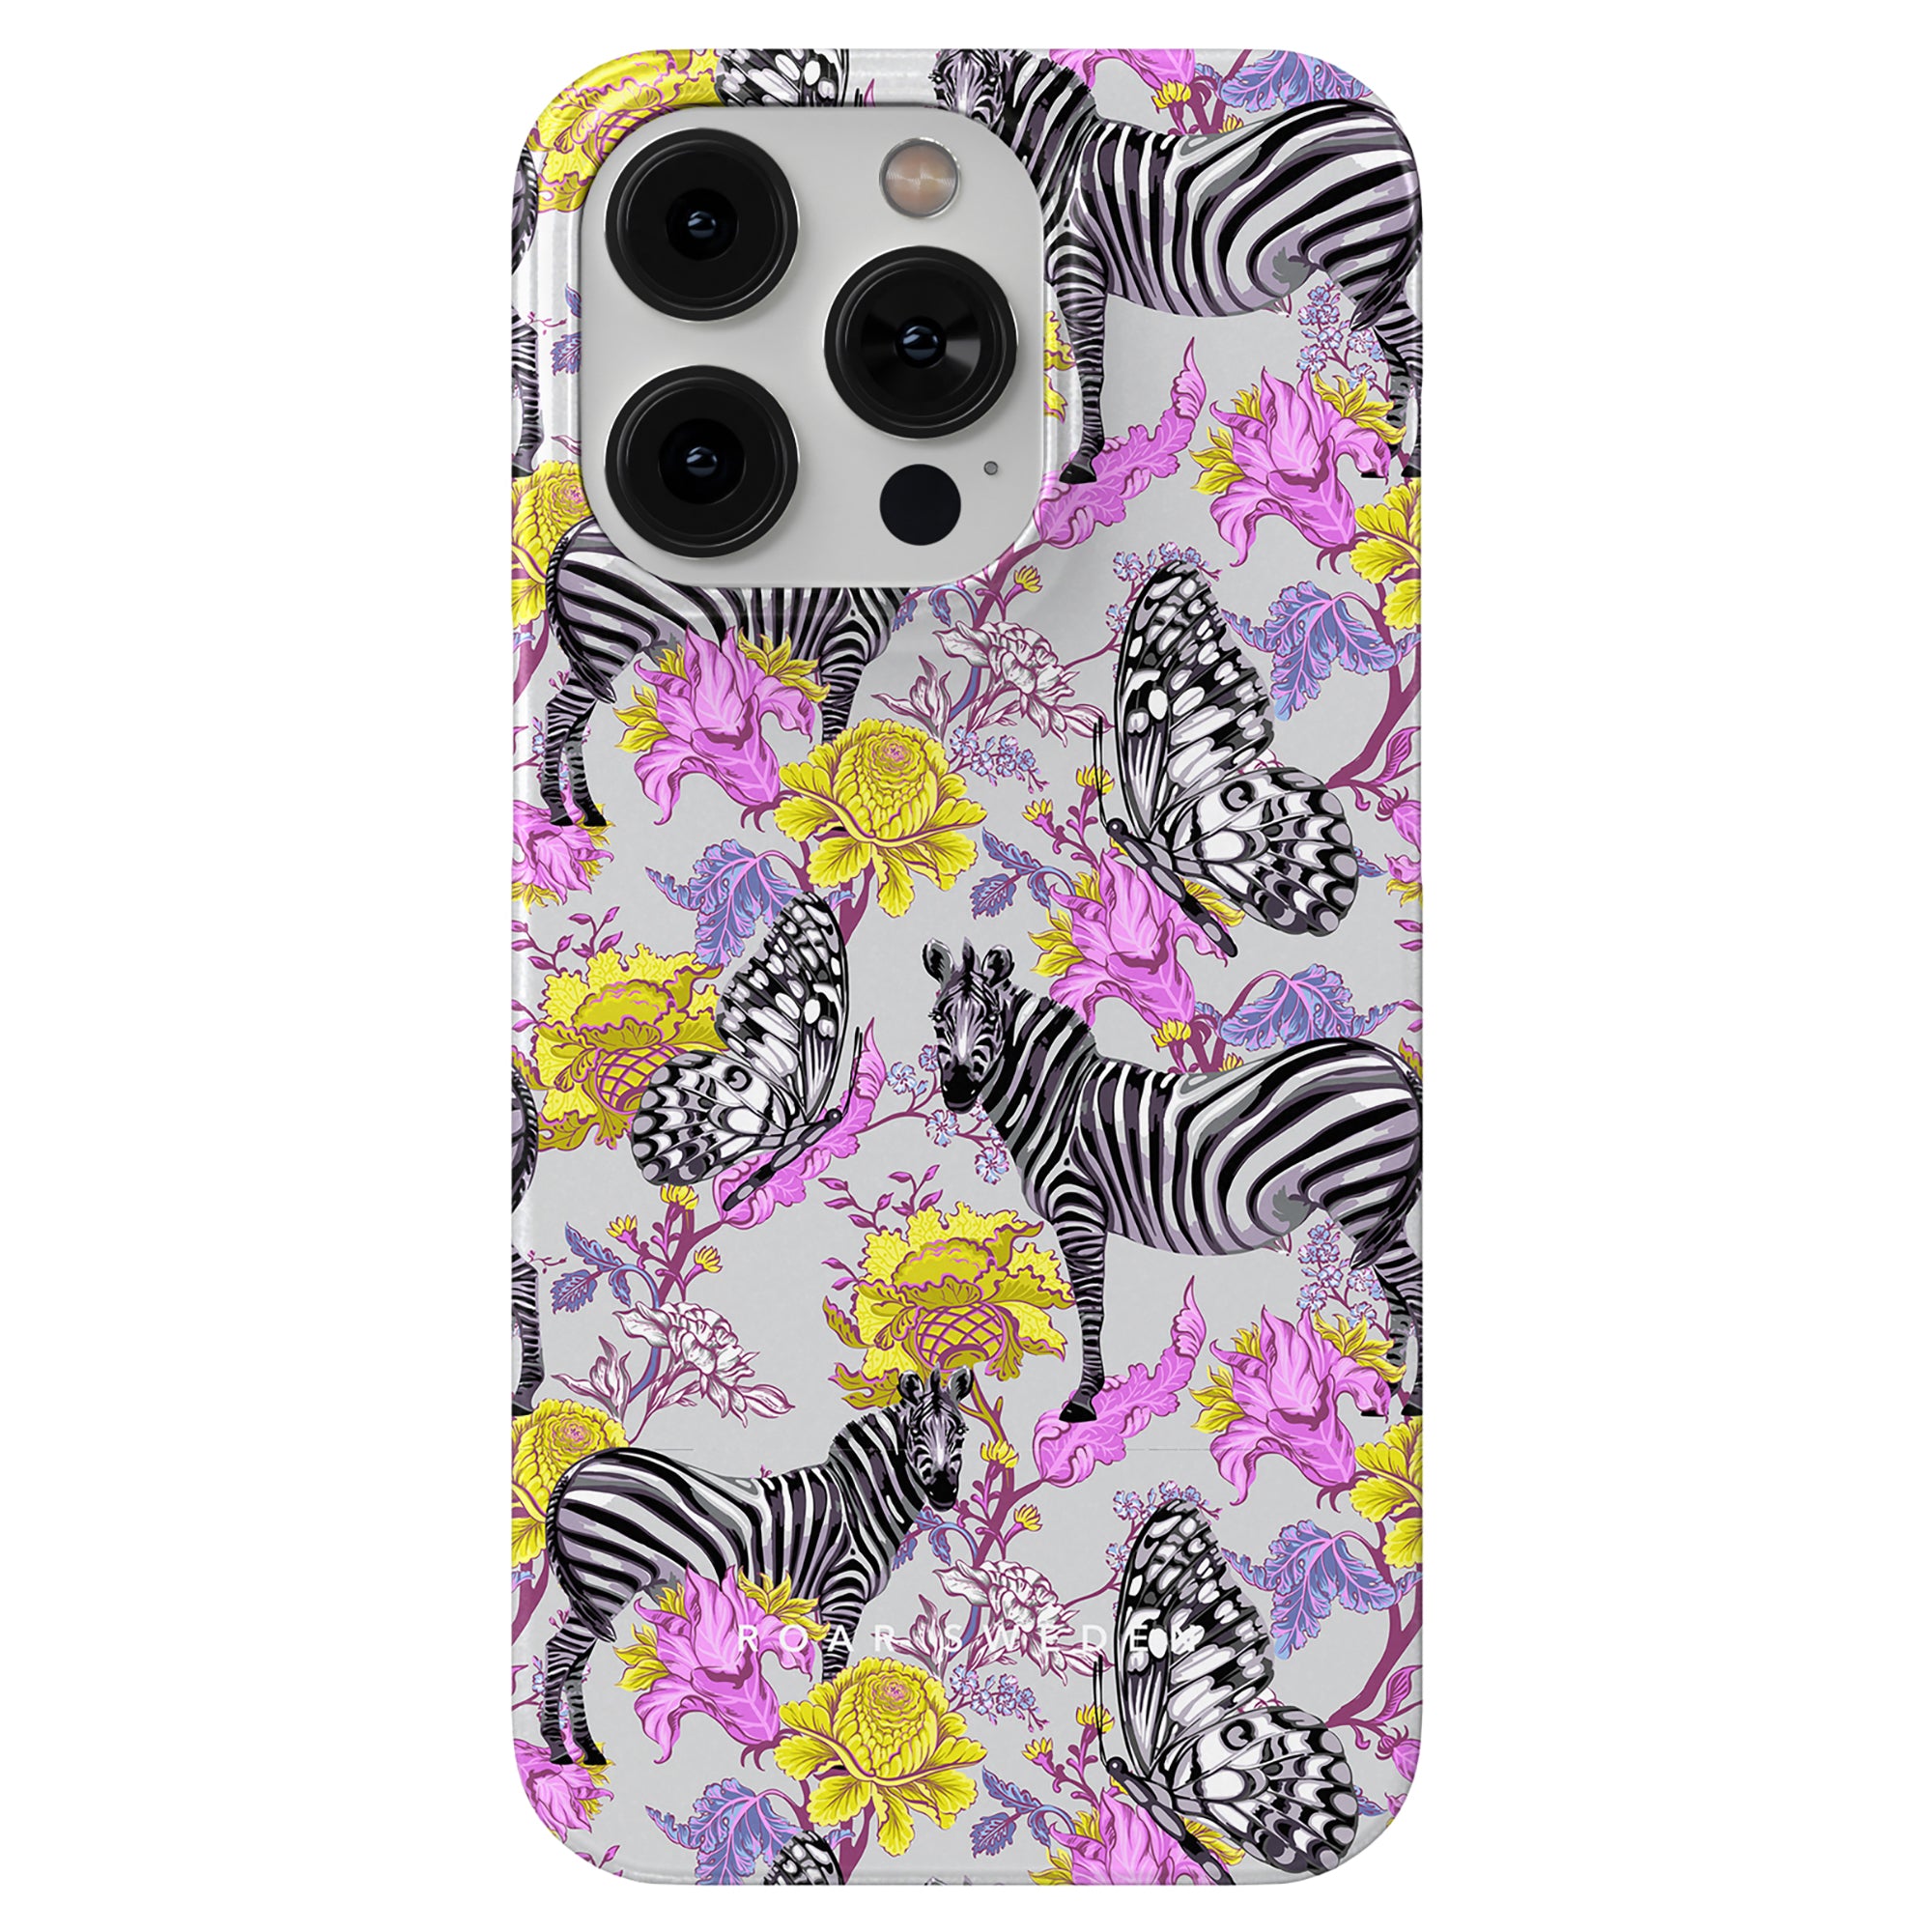 An Exotic Zebra - Slim phone case with floral design.